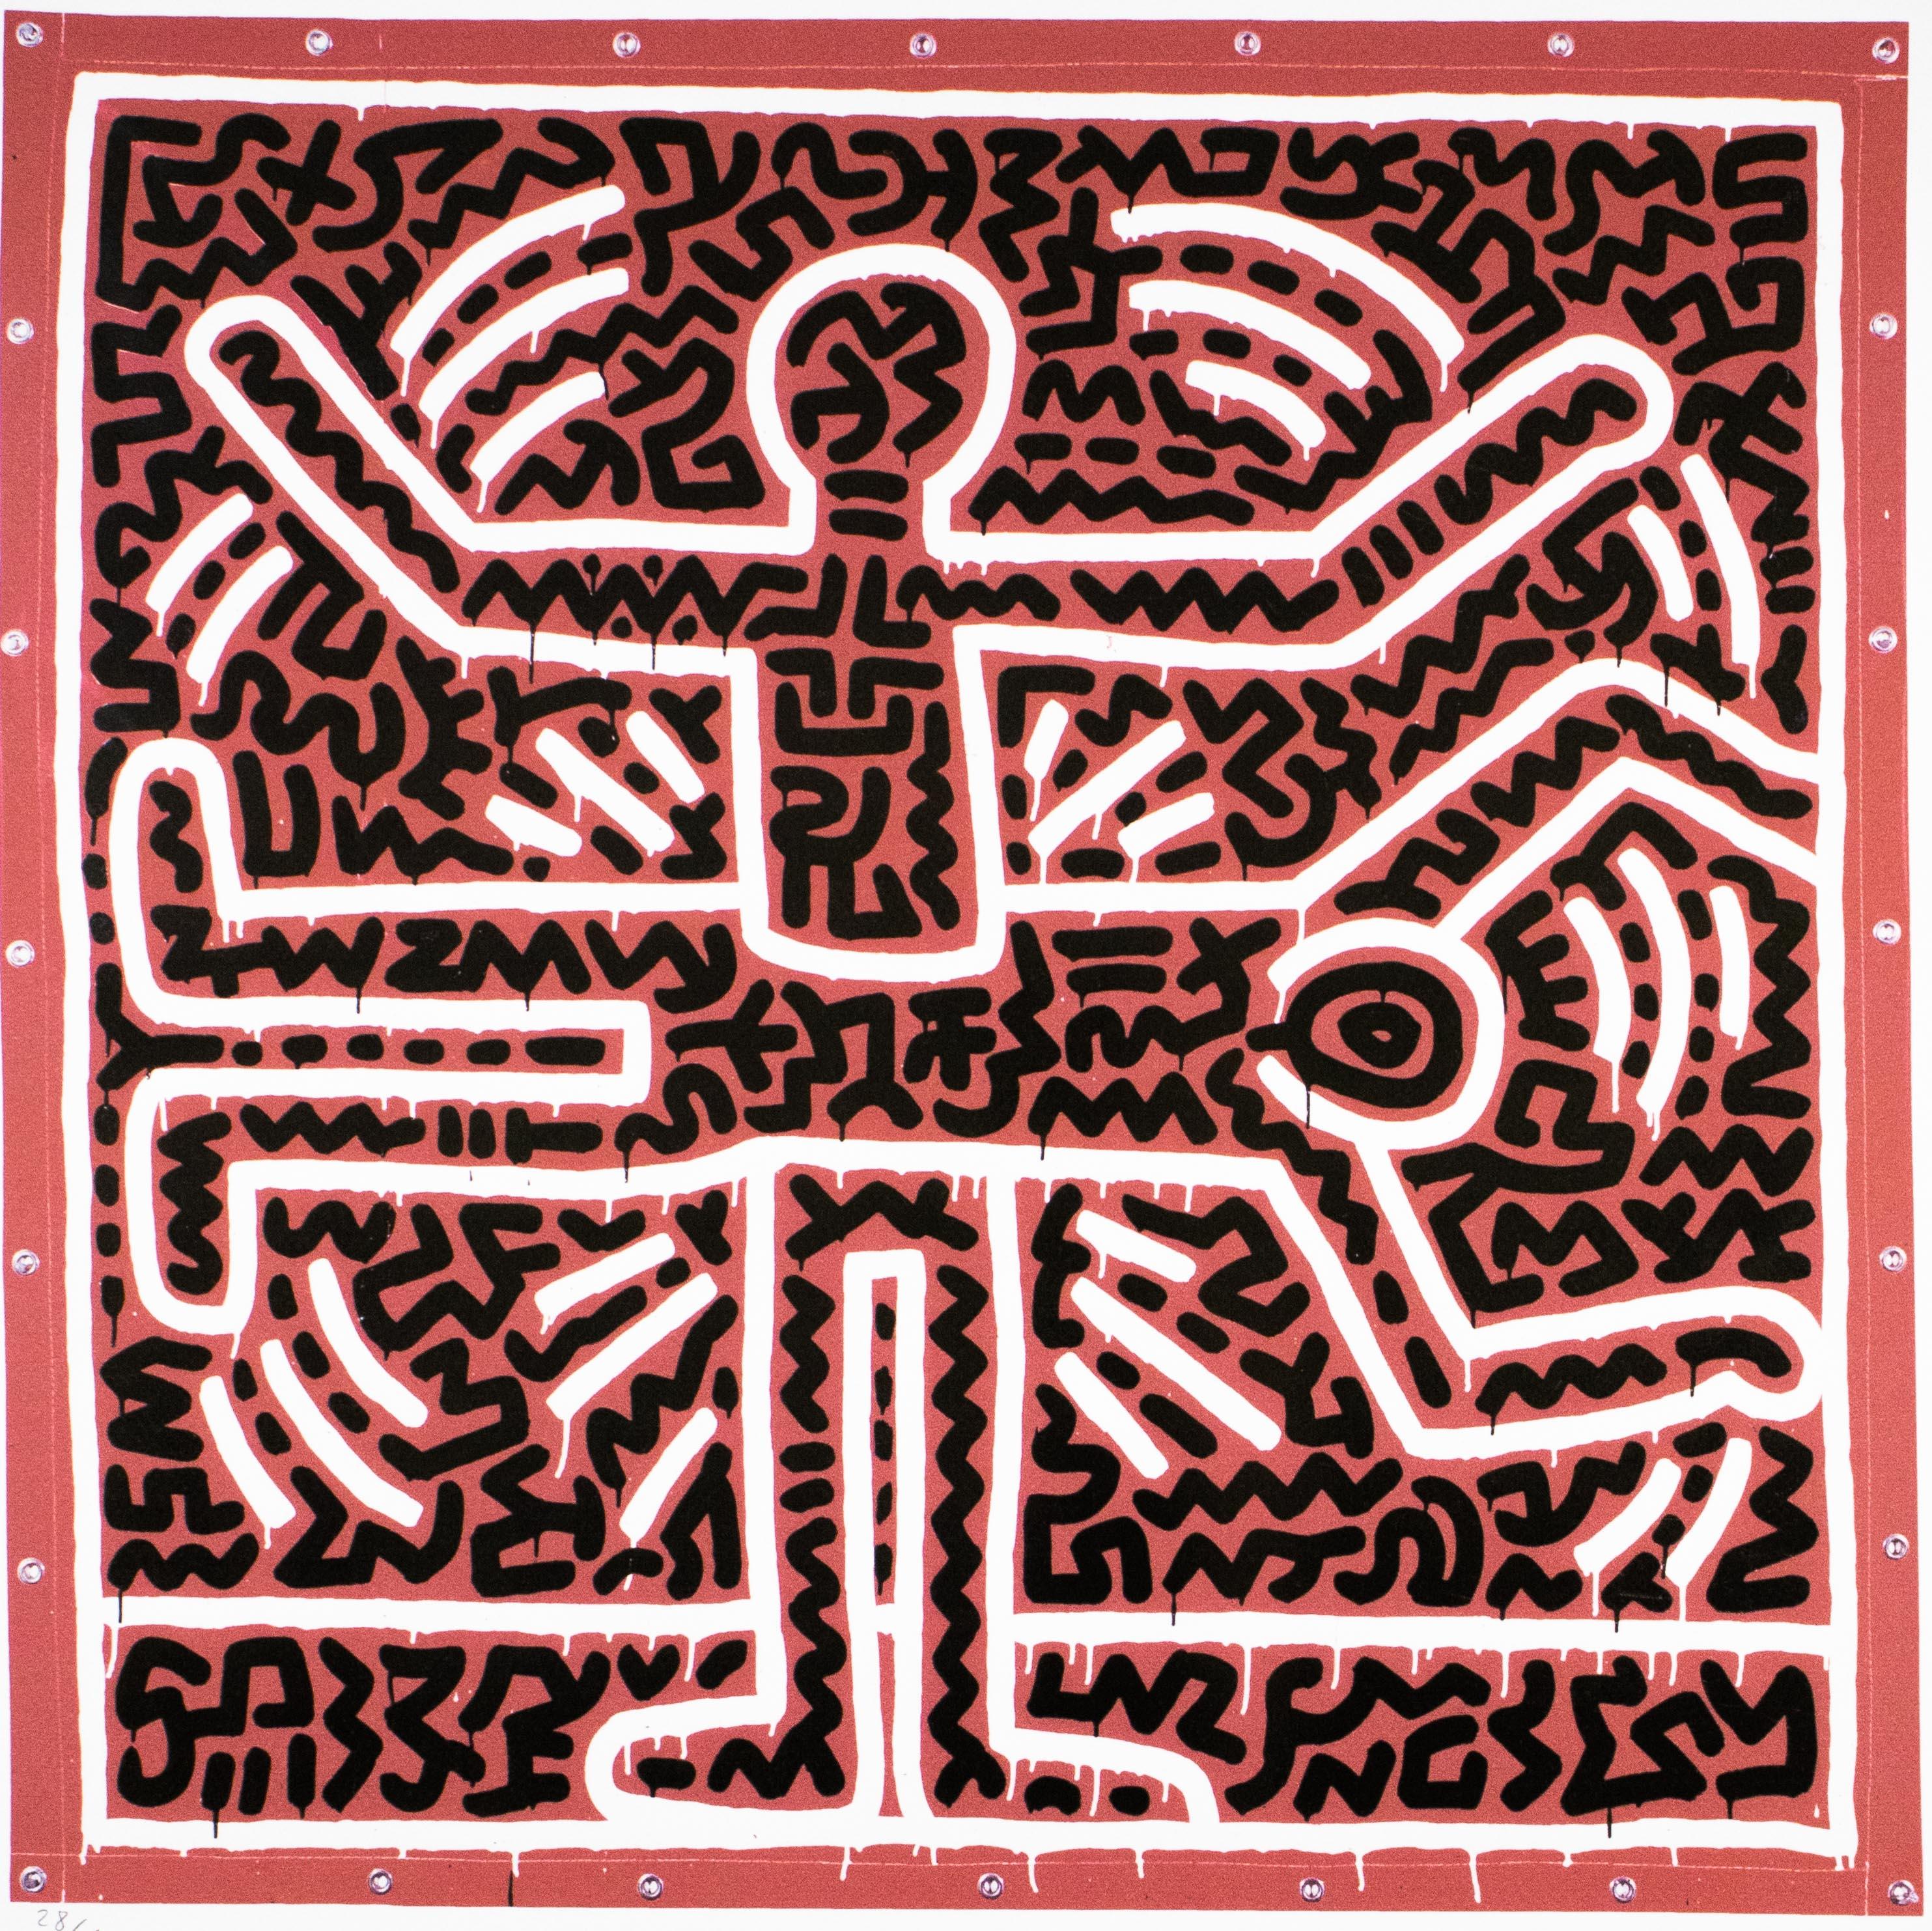 Lithograph - Limited Edition 28/150 - Keith Haring Foundation Inc.